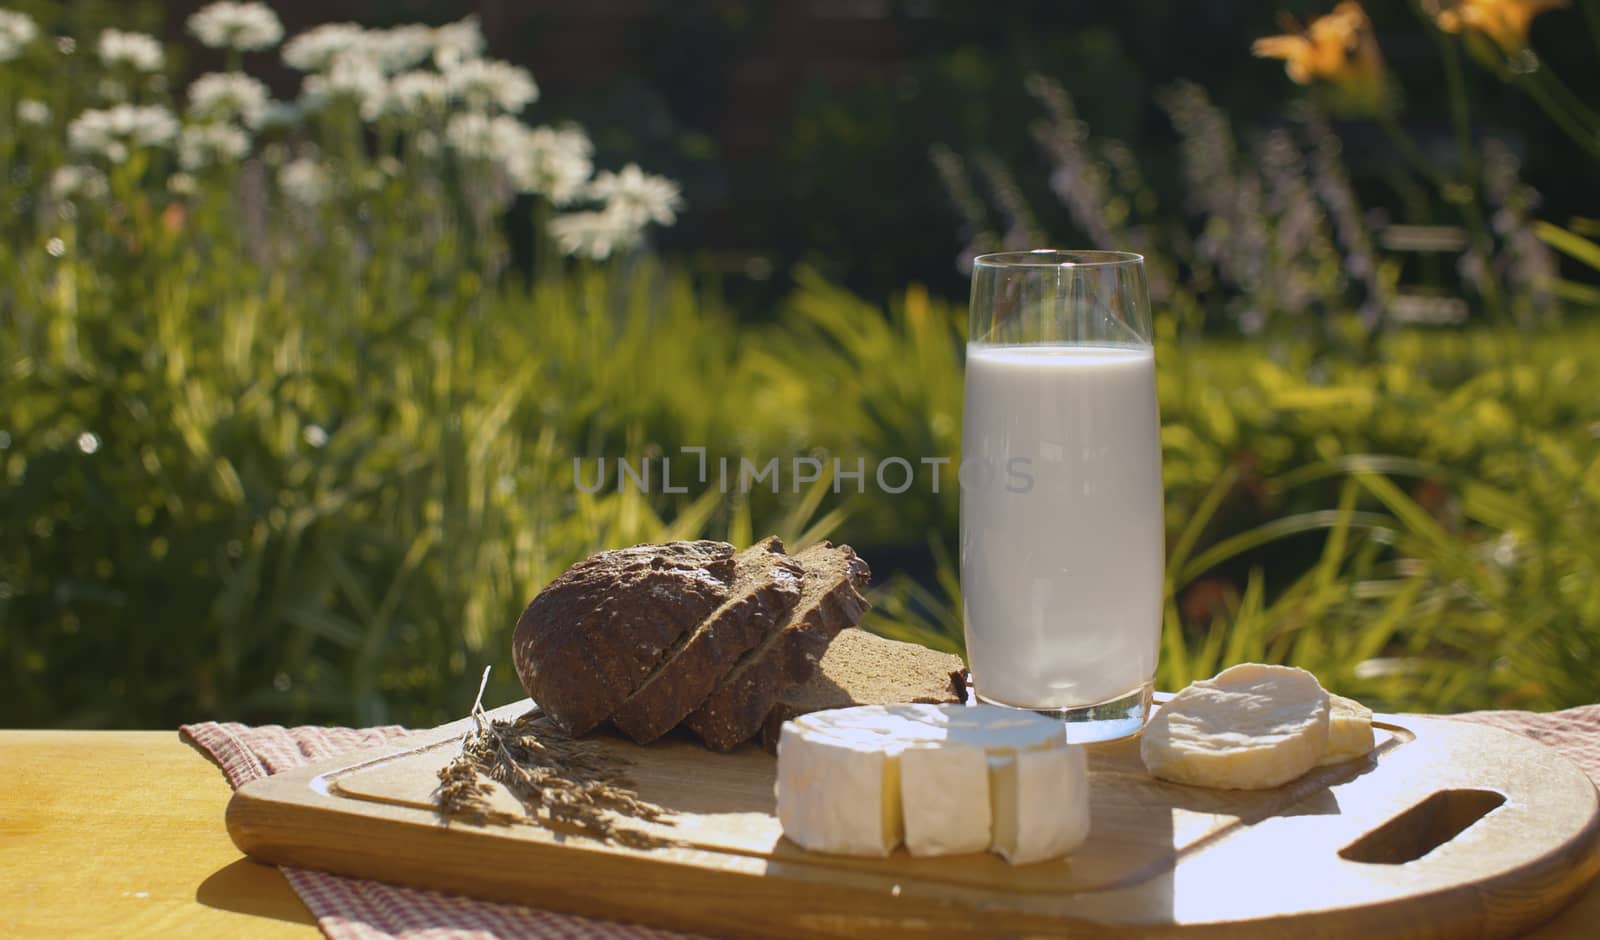 Close-up of a glass of milk, bread and cheese on a wooden cutting board. Breakfast in the garden on a background of flowers